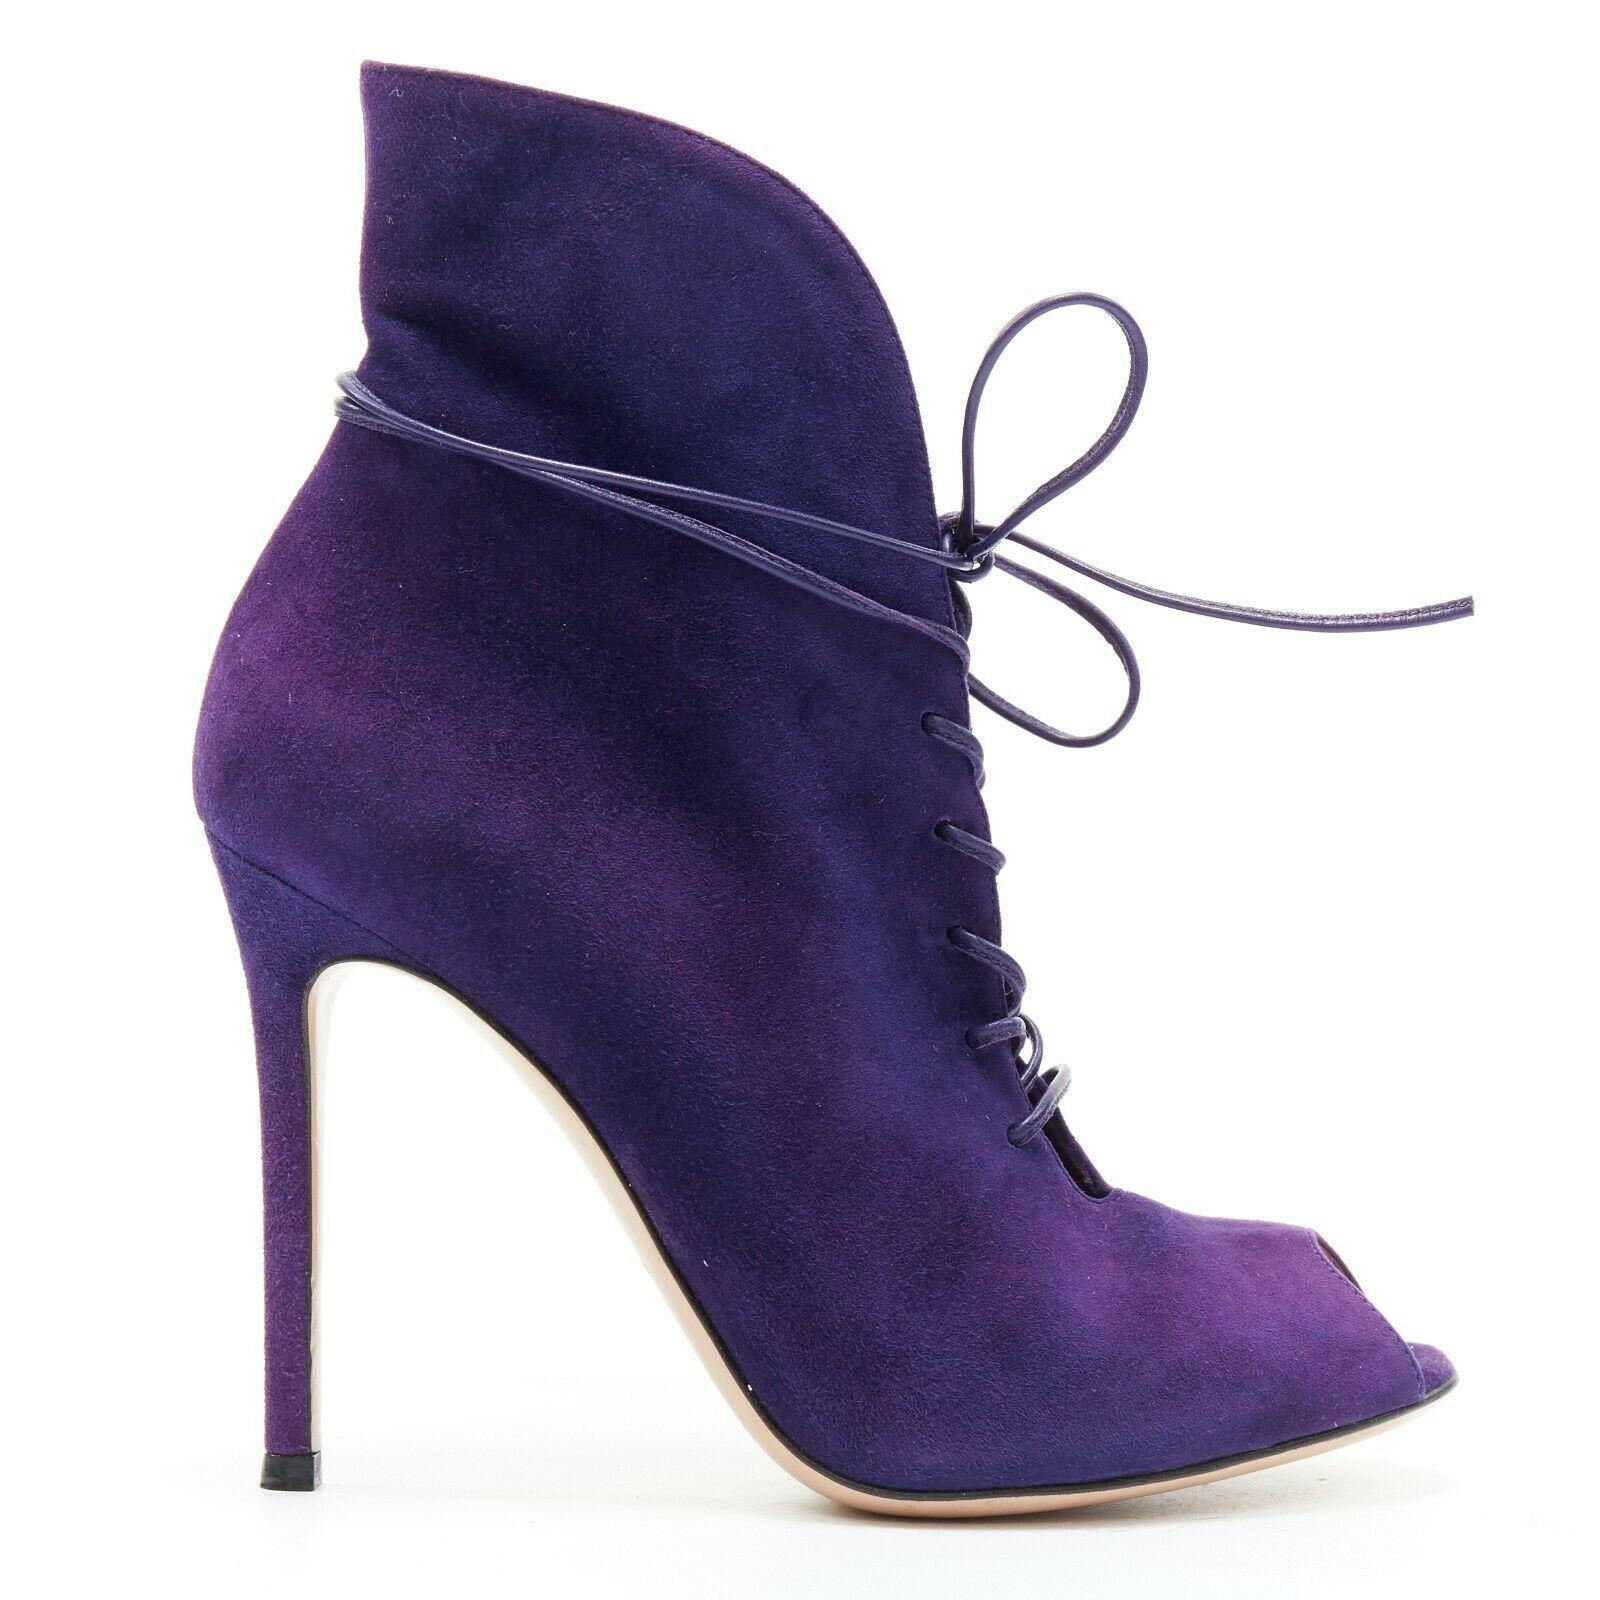 new GIANVITO ROSSI purple suede lace up peep toe deep V vamp heel bootie EU36
GIANVITO ROSSI
Purple suede leather upper. 
Peep toe. 
Leather lace up front. 
Wrap around ankle detail. 
Deep V low cut vamp. 
Curved top line. 
Slim high heel. 
Made in